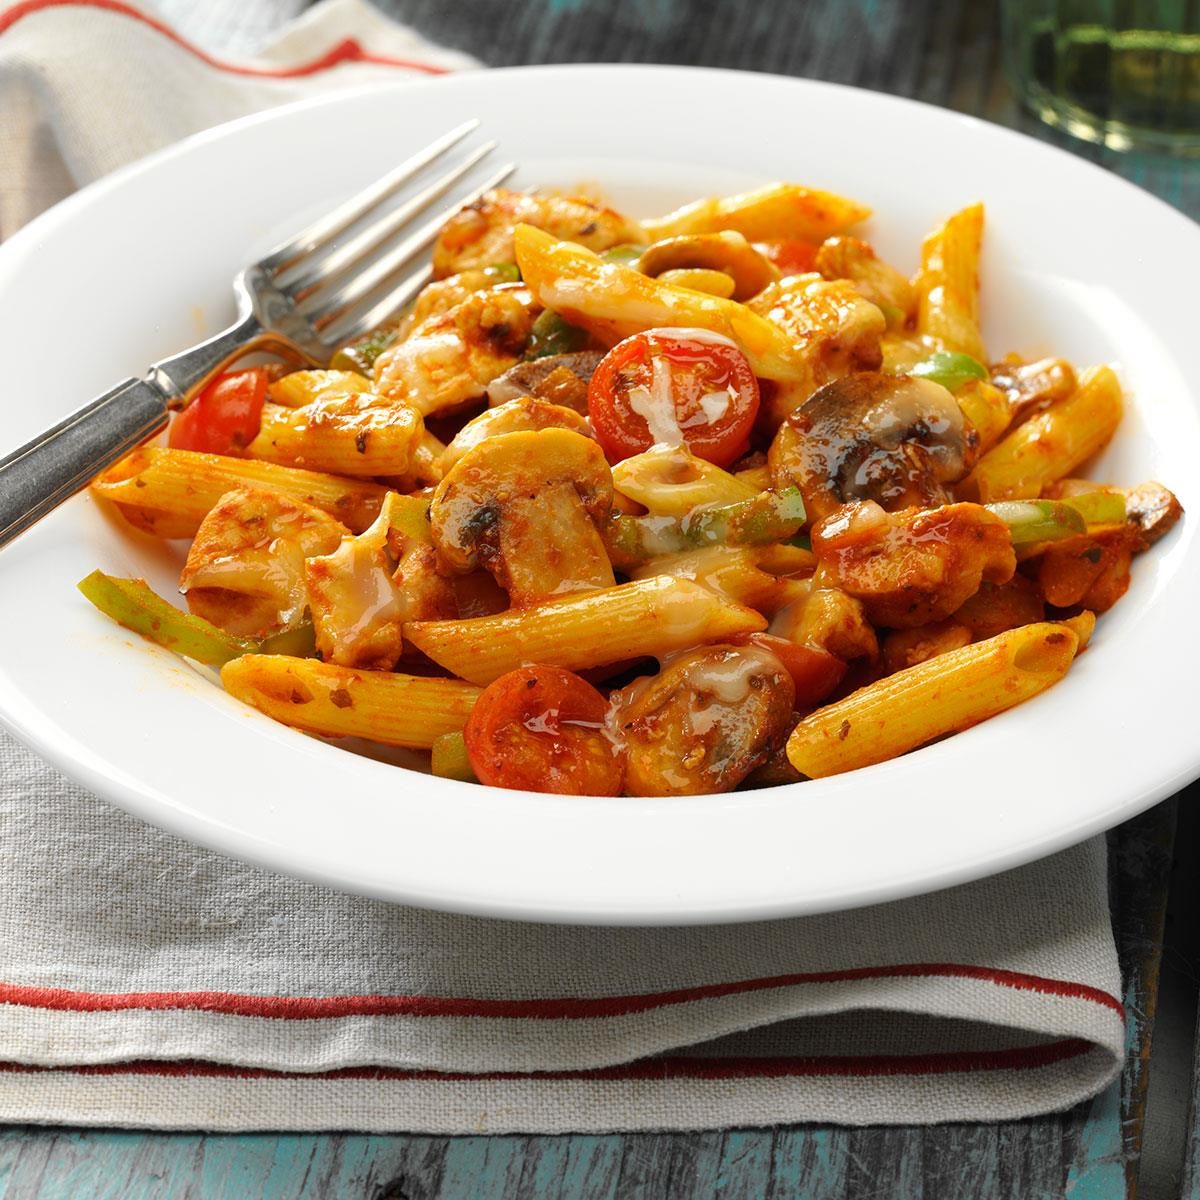 Italian Chicken and Penne